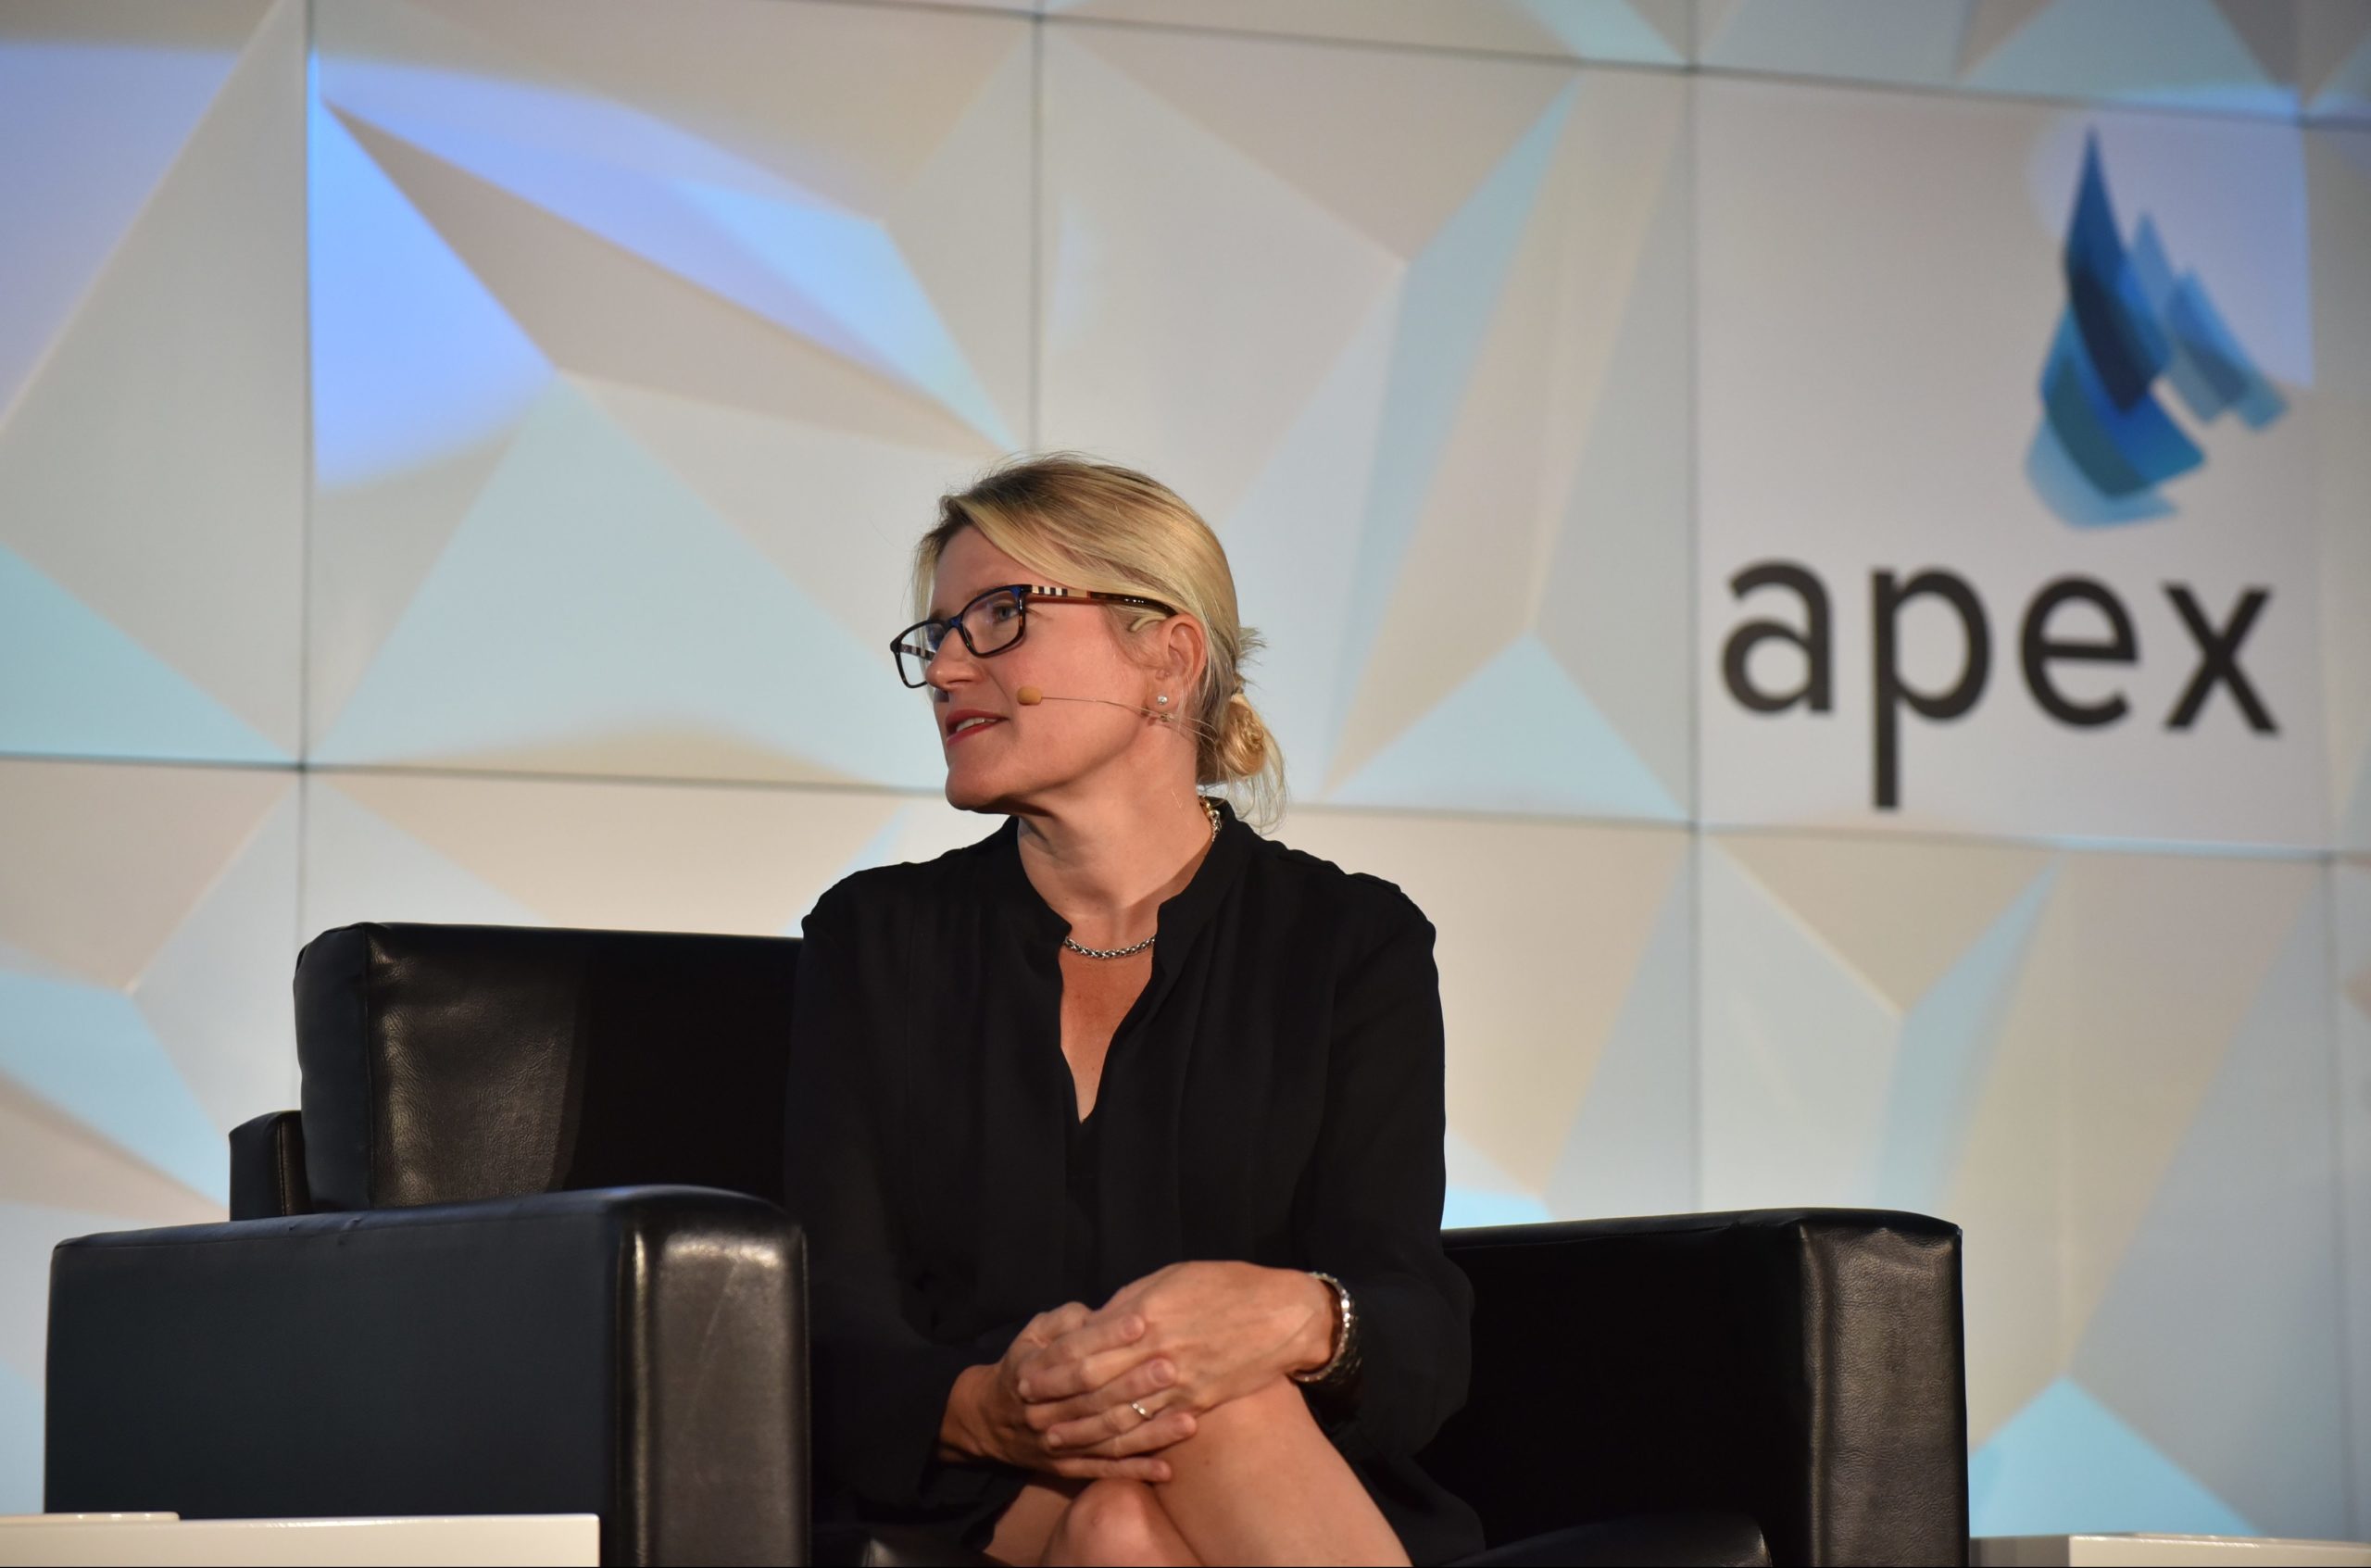 JetBlue president and CEO Joanna Geraghty onstage at APEX EXPO 2019